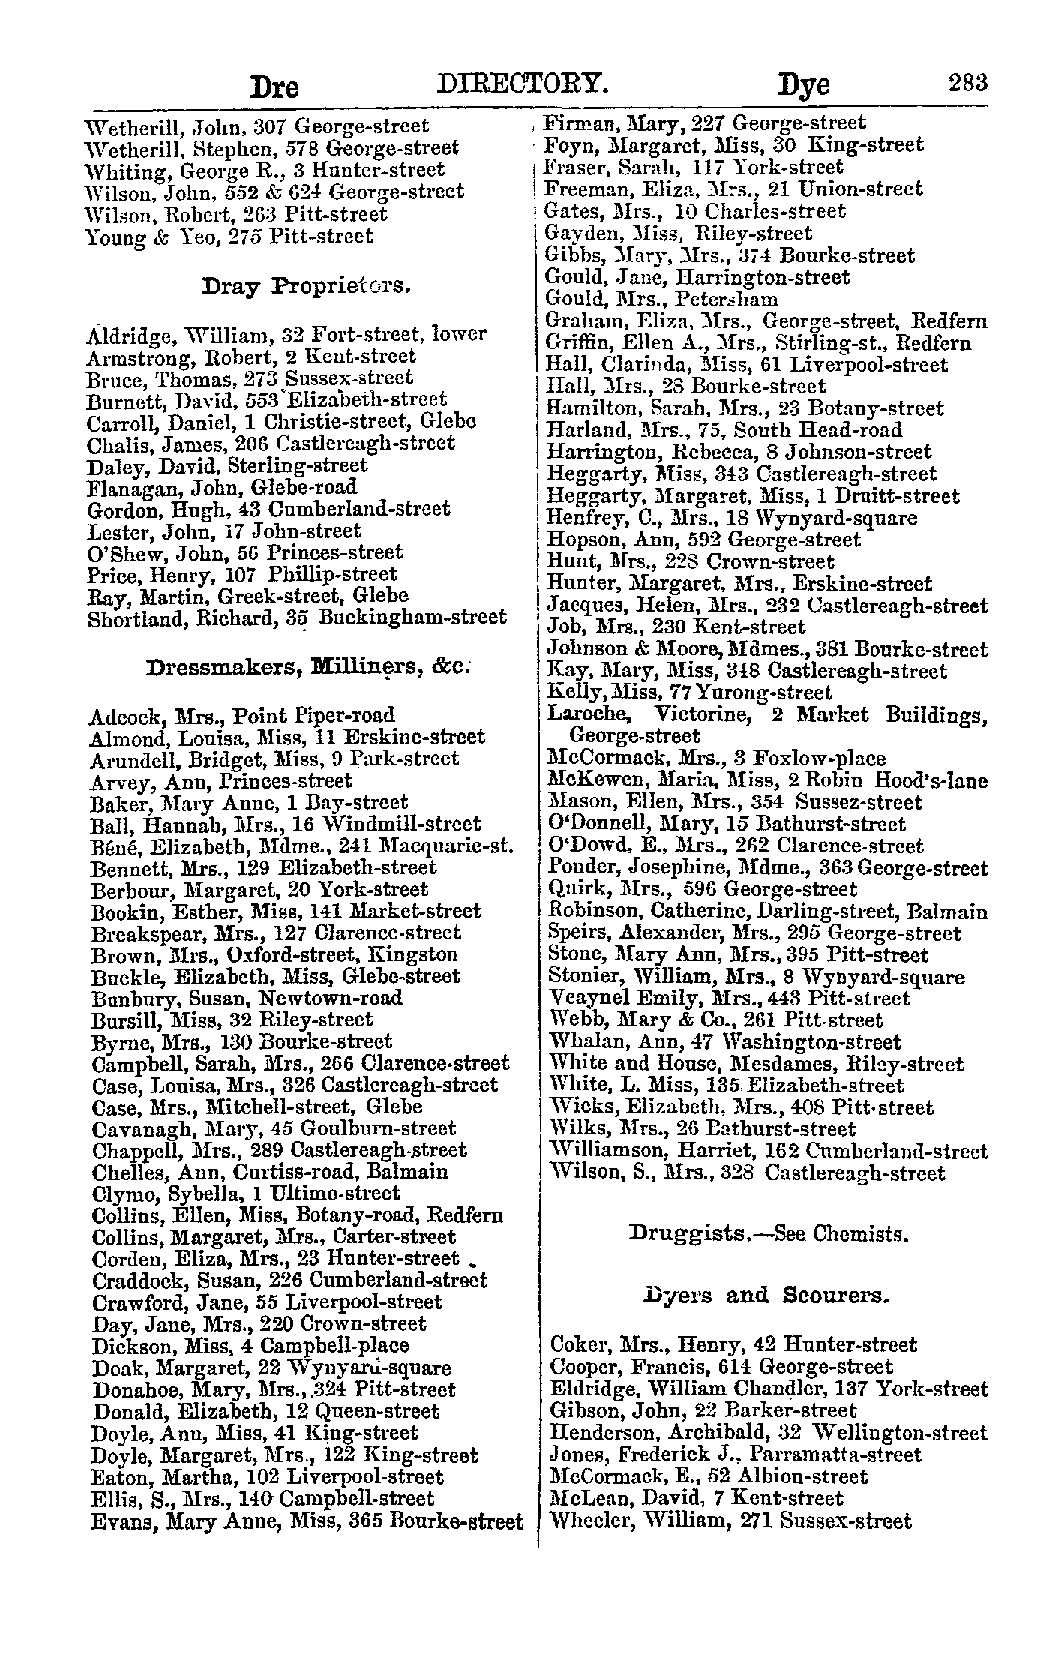 IHR New South Wales Family History, SANDS 1863 Index